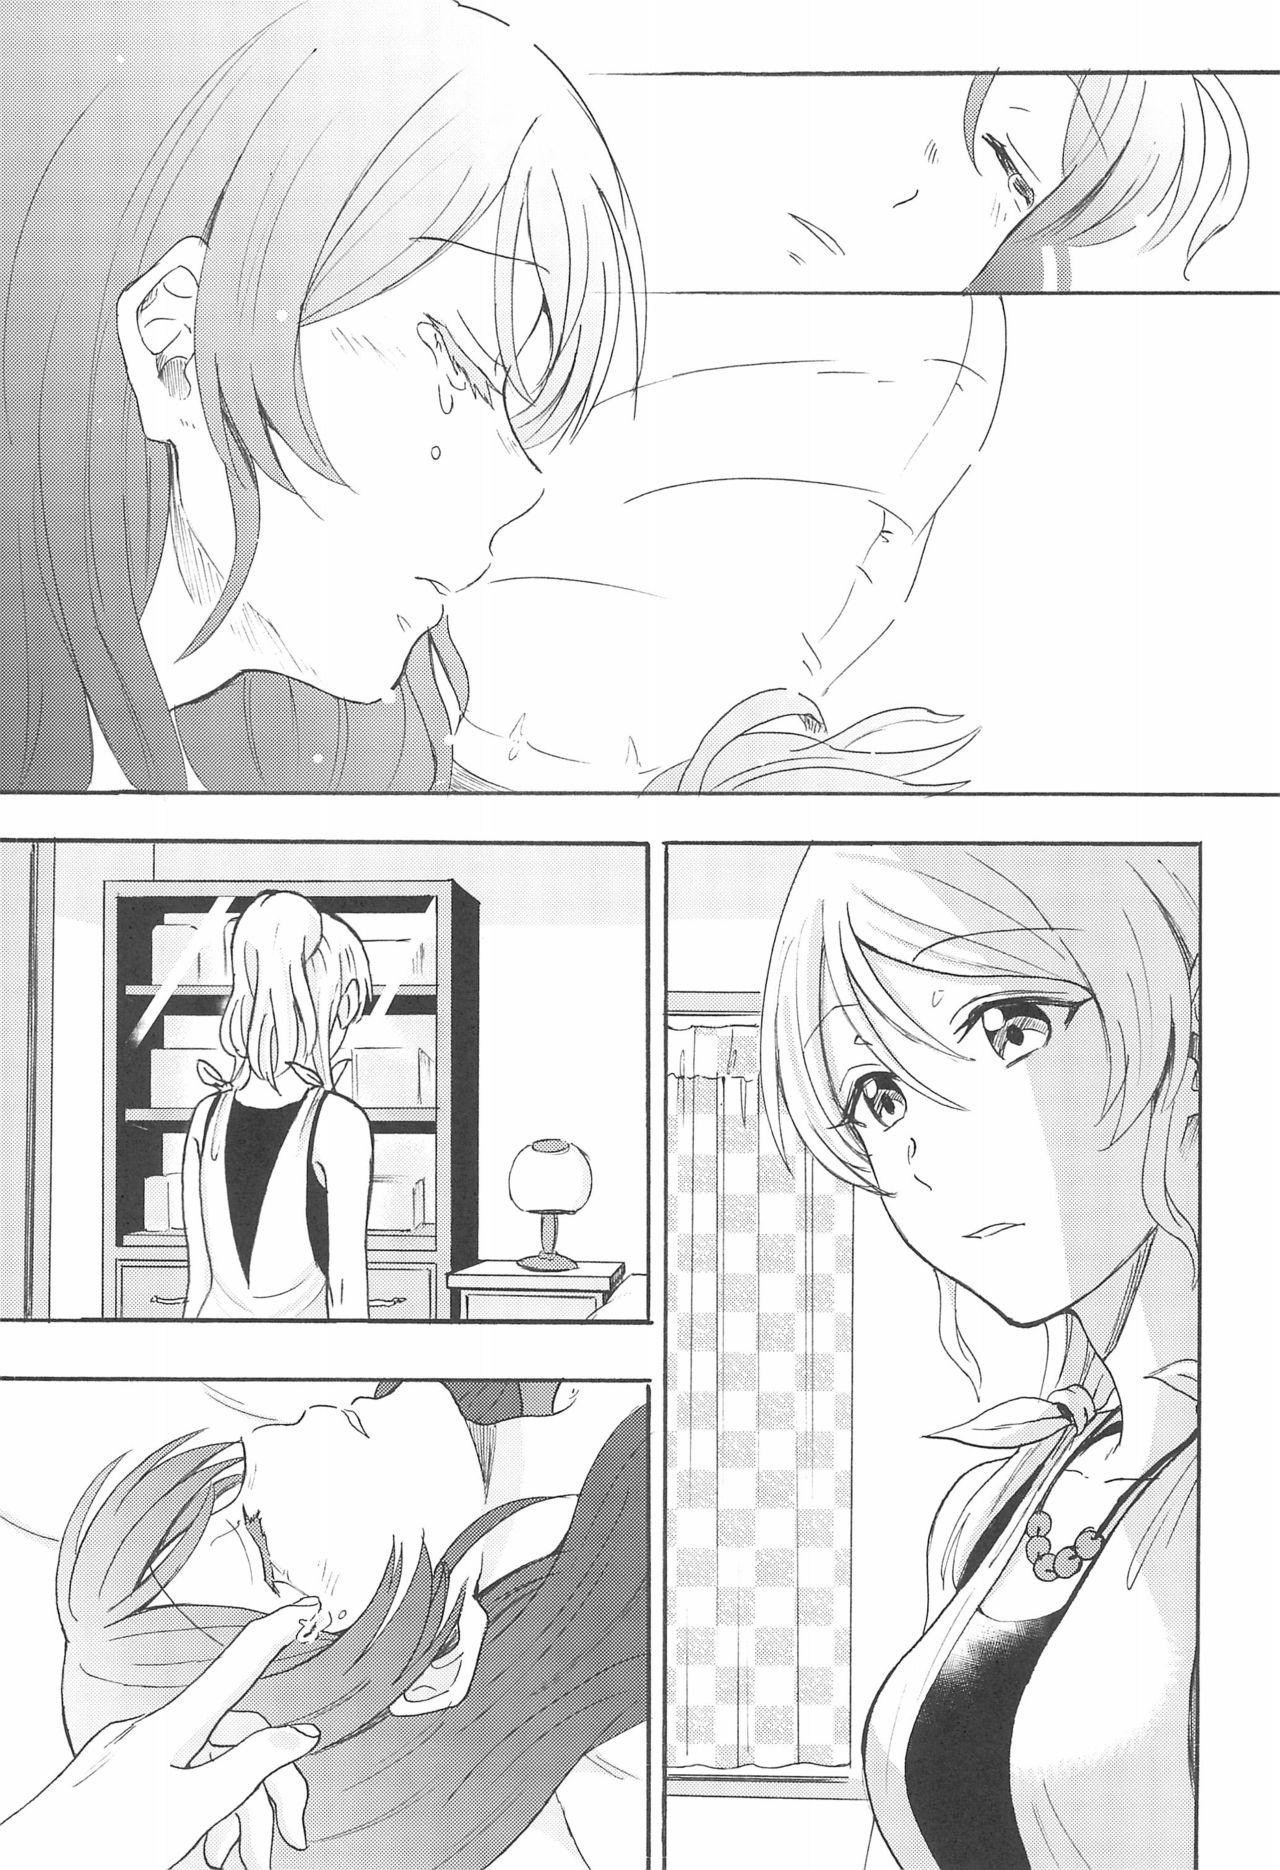 Old And Young LONELINESS - Love live Hot Chicks Fucking - Page 10